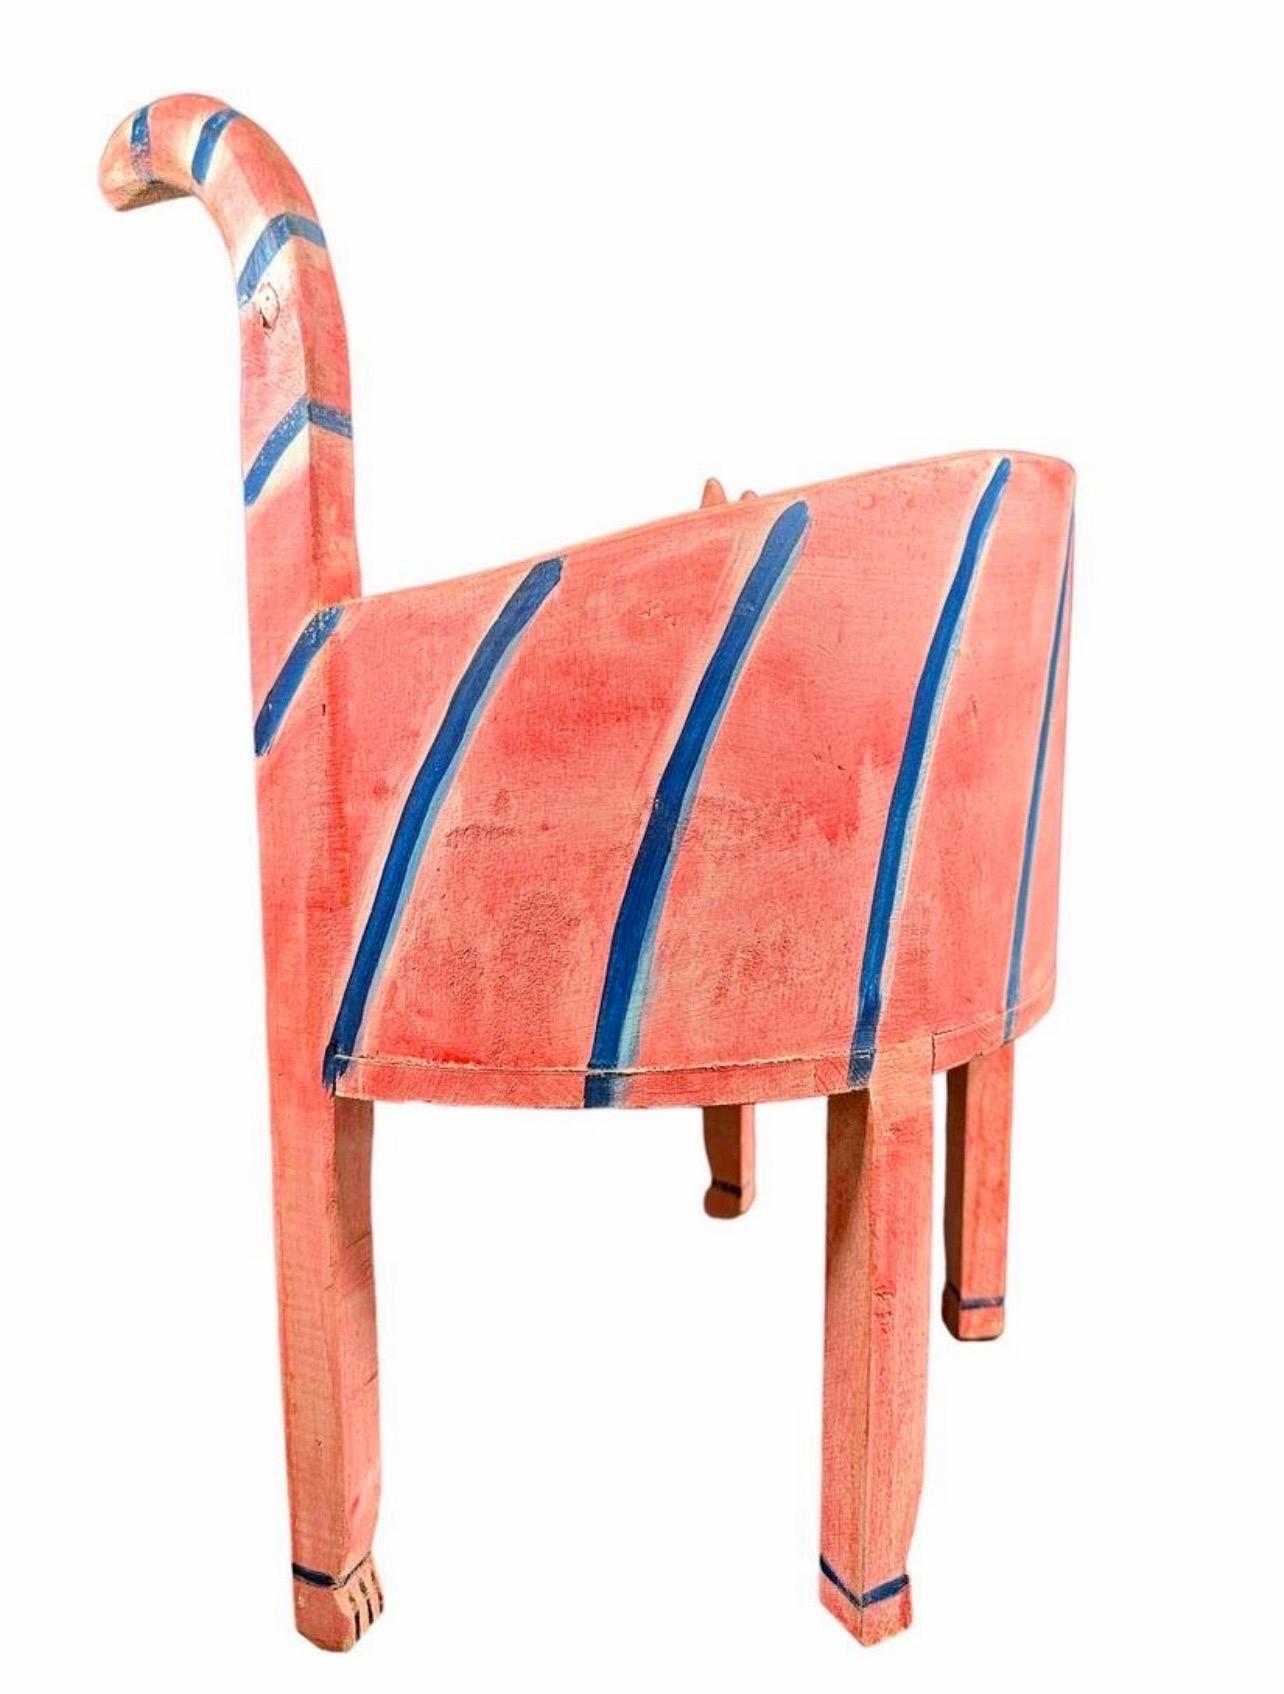 French Folk Art Hand Carved Painted Whimsical Childrens Cat Chair Gerard Rigot For Sale 1